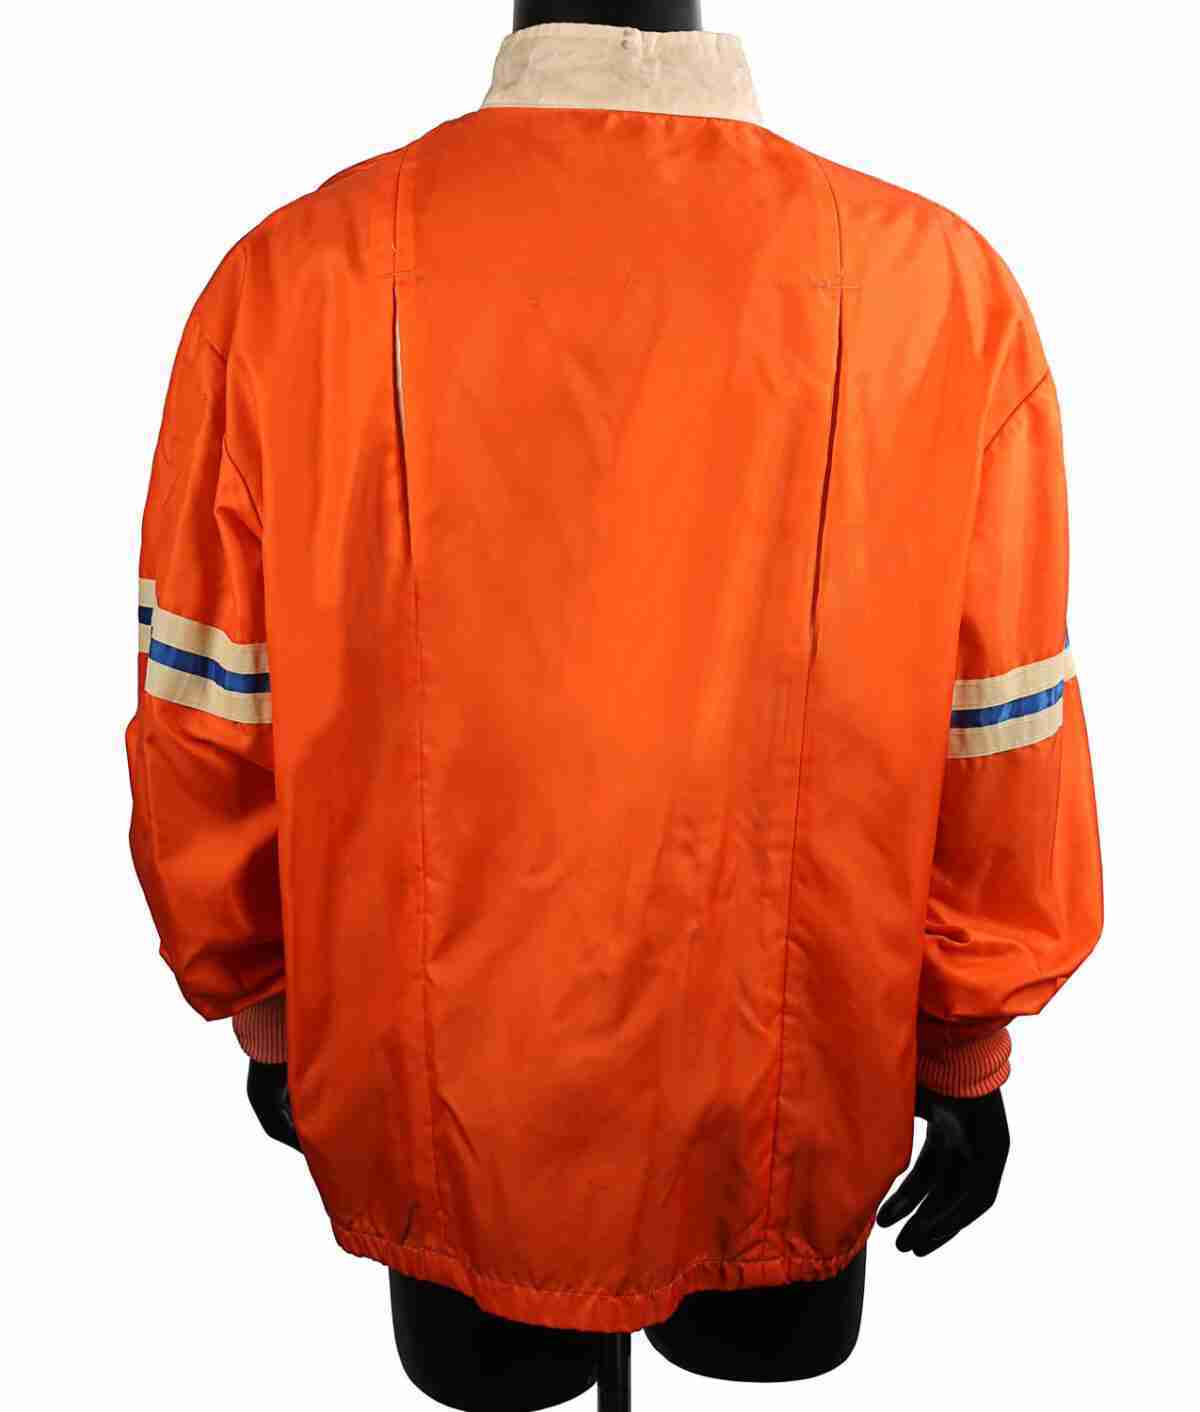 J.J McClure's orange jacket from the Cannonball Run